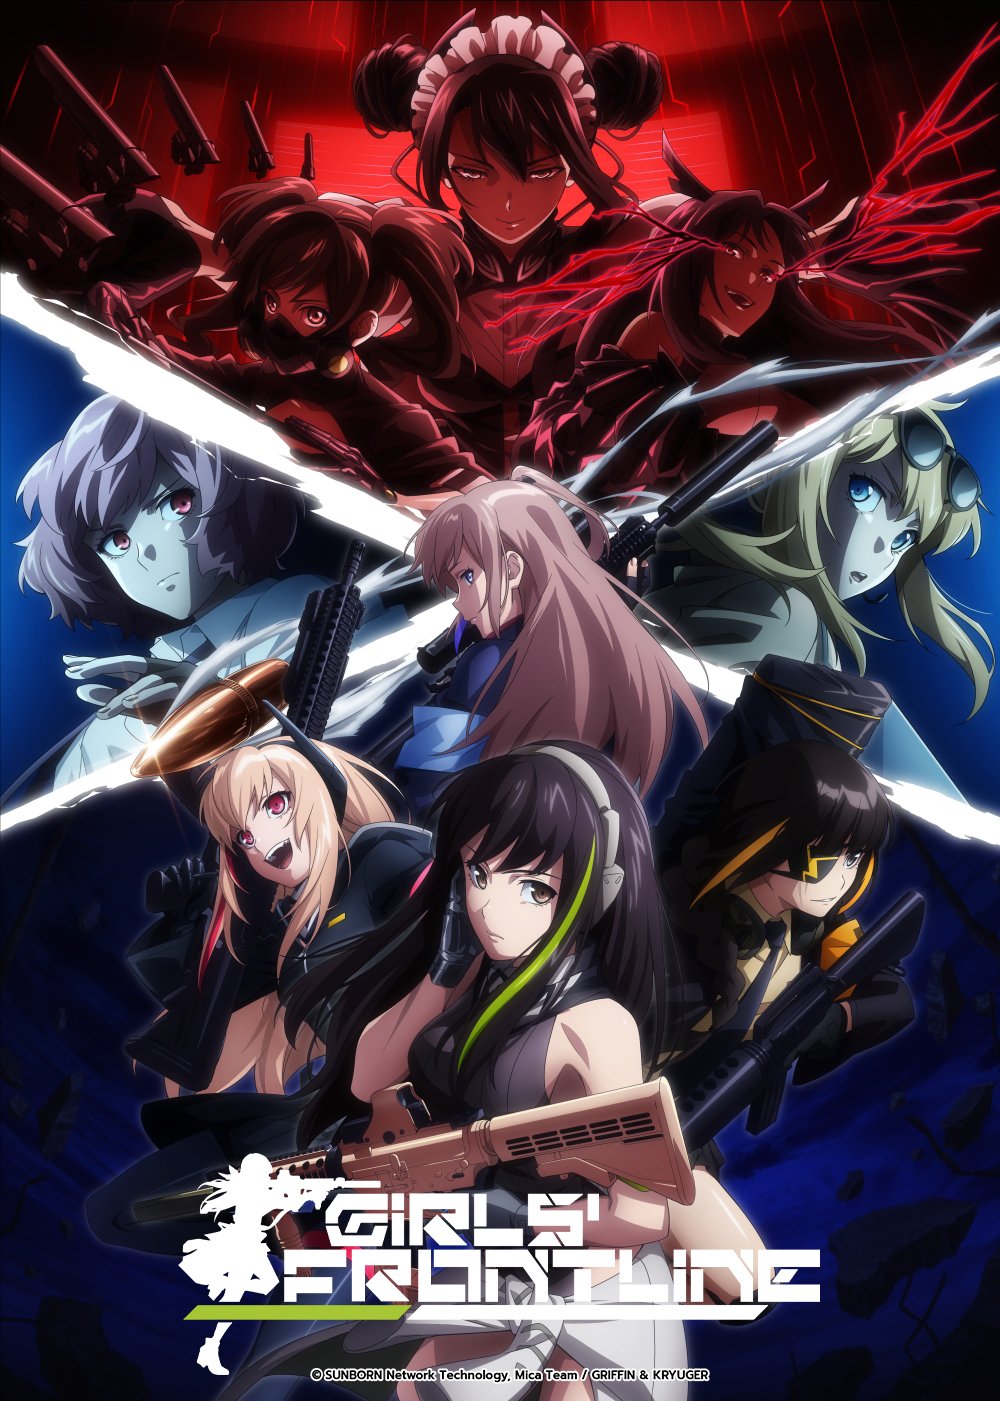 Funimation - ‪Horror anime Shiki expires from the... | Facebook‬-demhanvico.com.vn